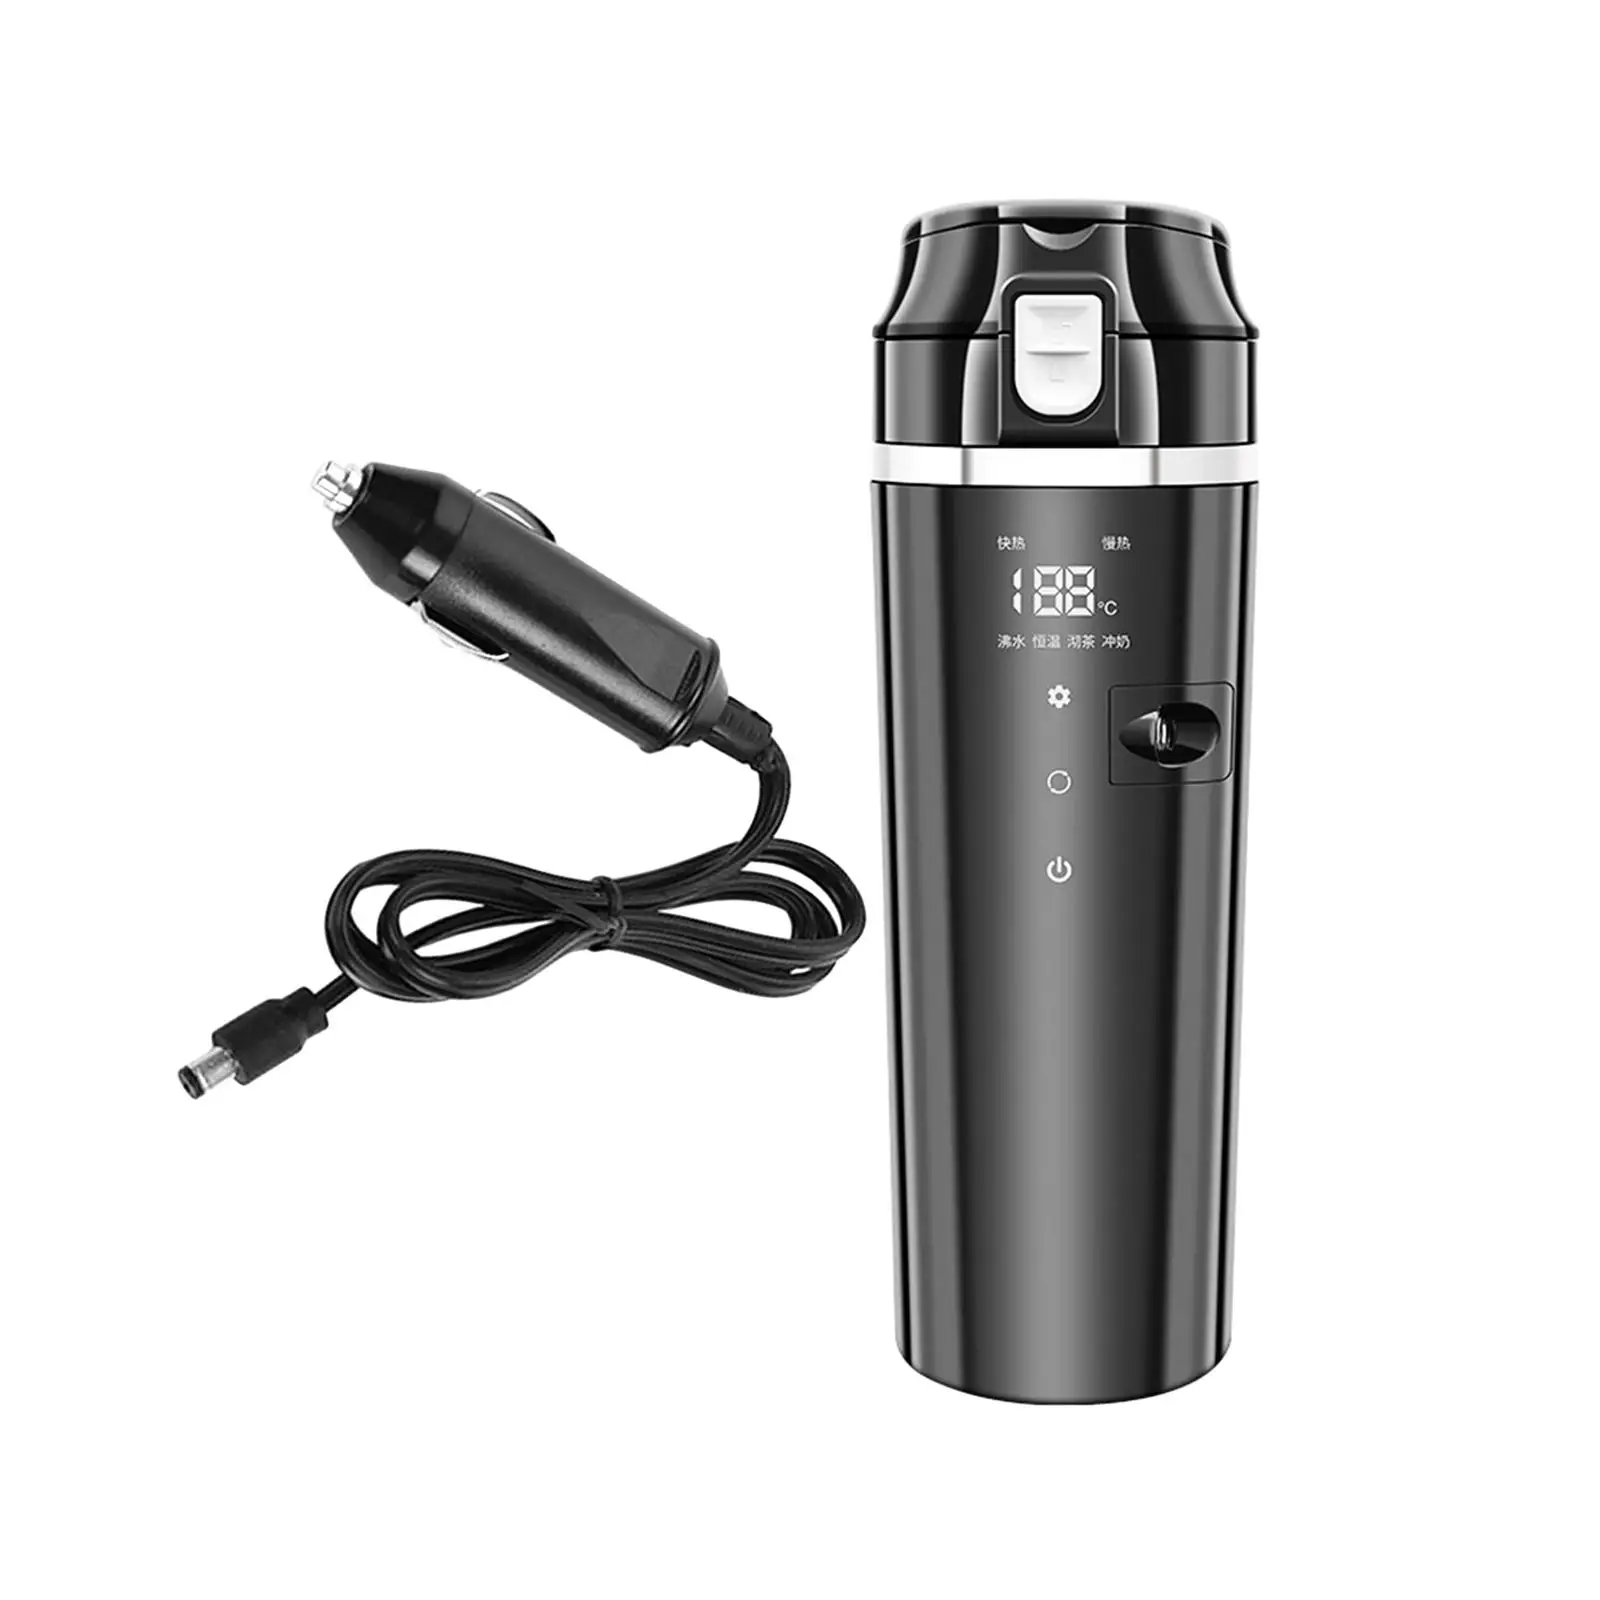 12V 24V 500ml Car Electric Water Kettle 50W-100W Fast Heating Speed 9x2.8inch for Long Time Self Driving Trip Multipurpose